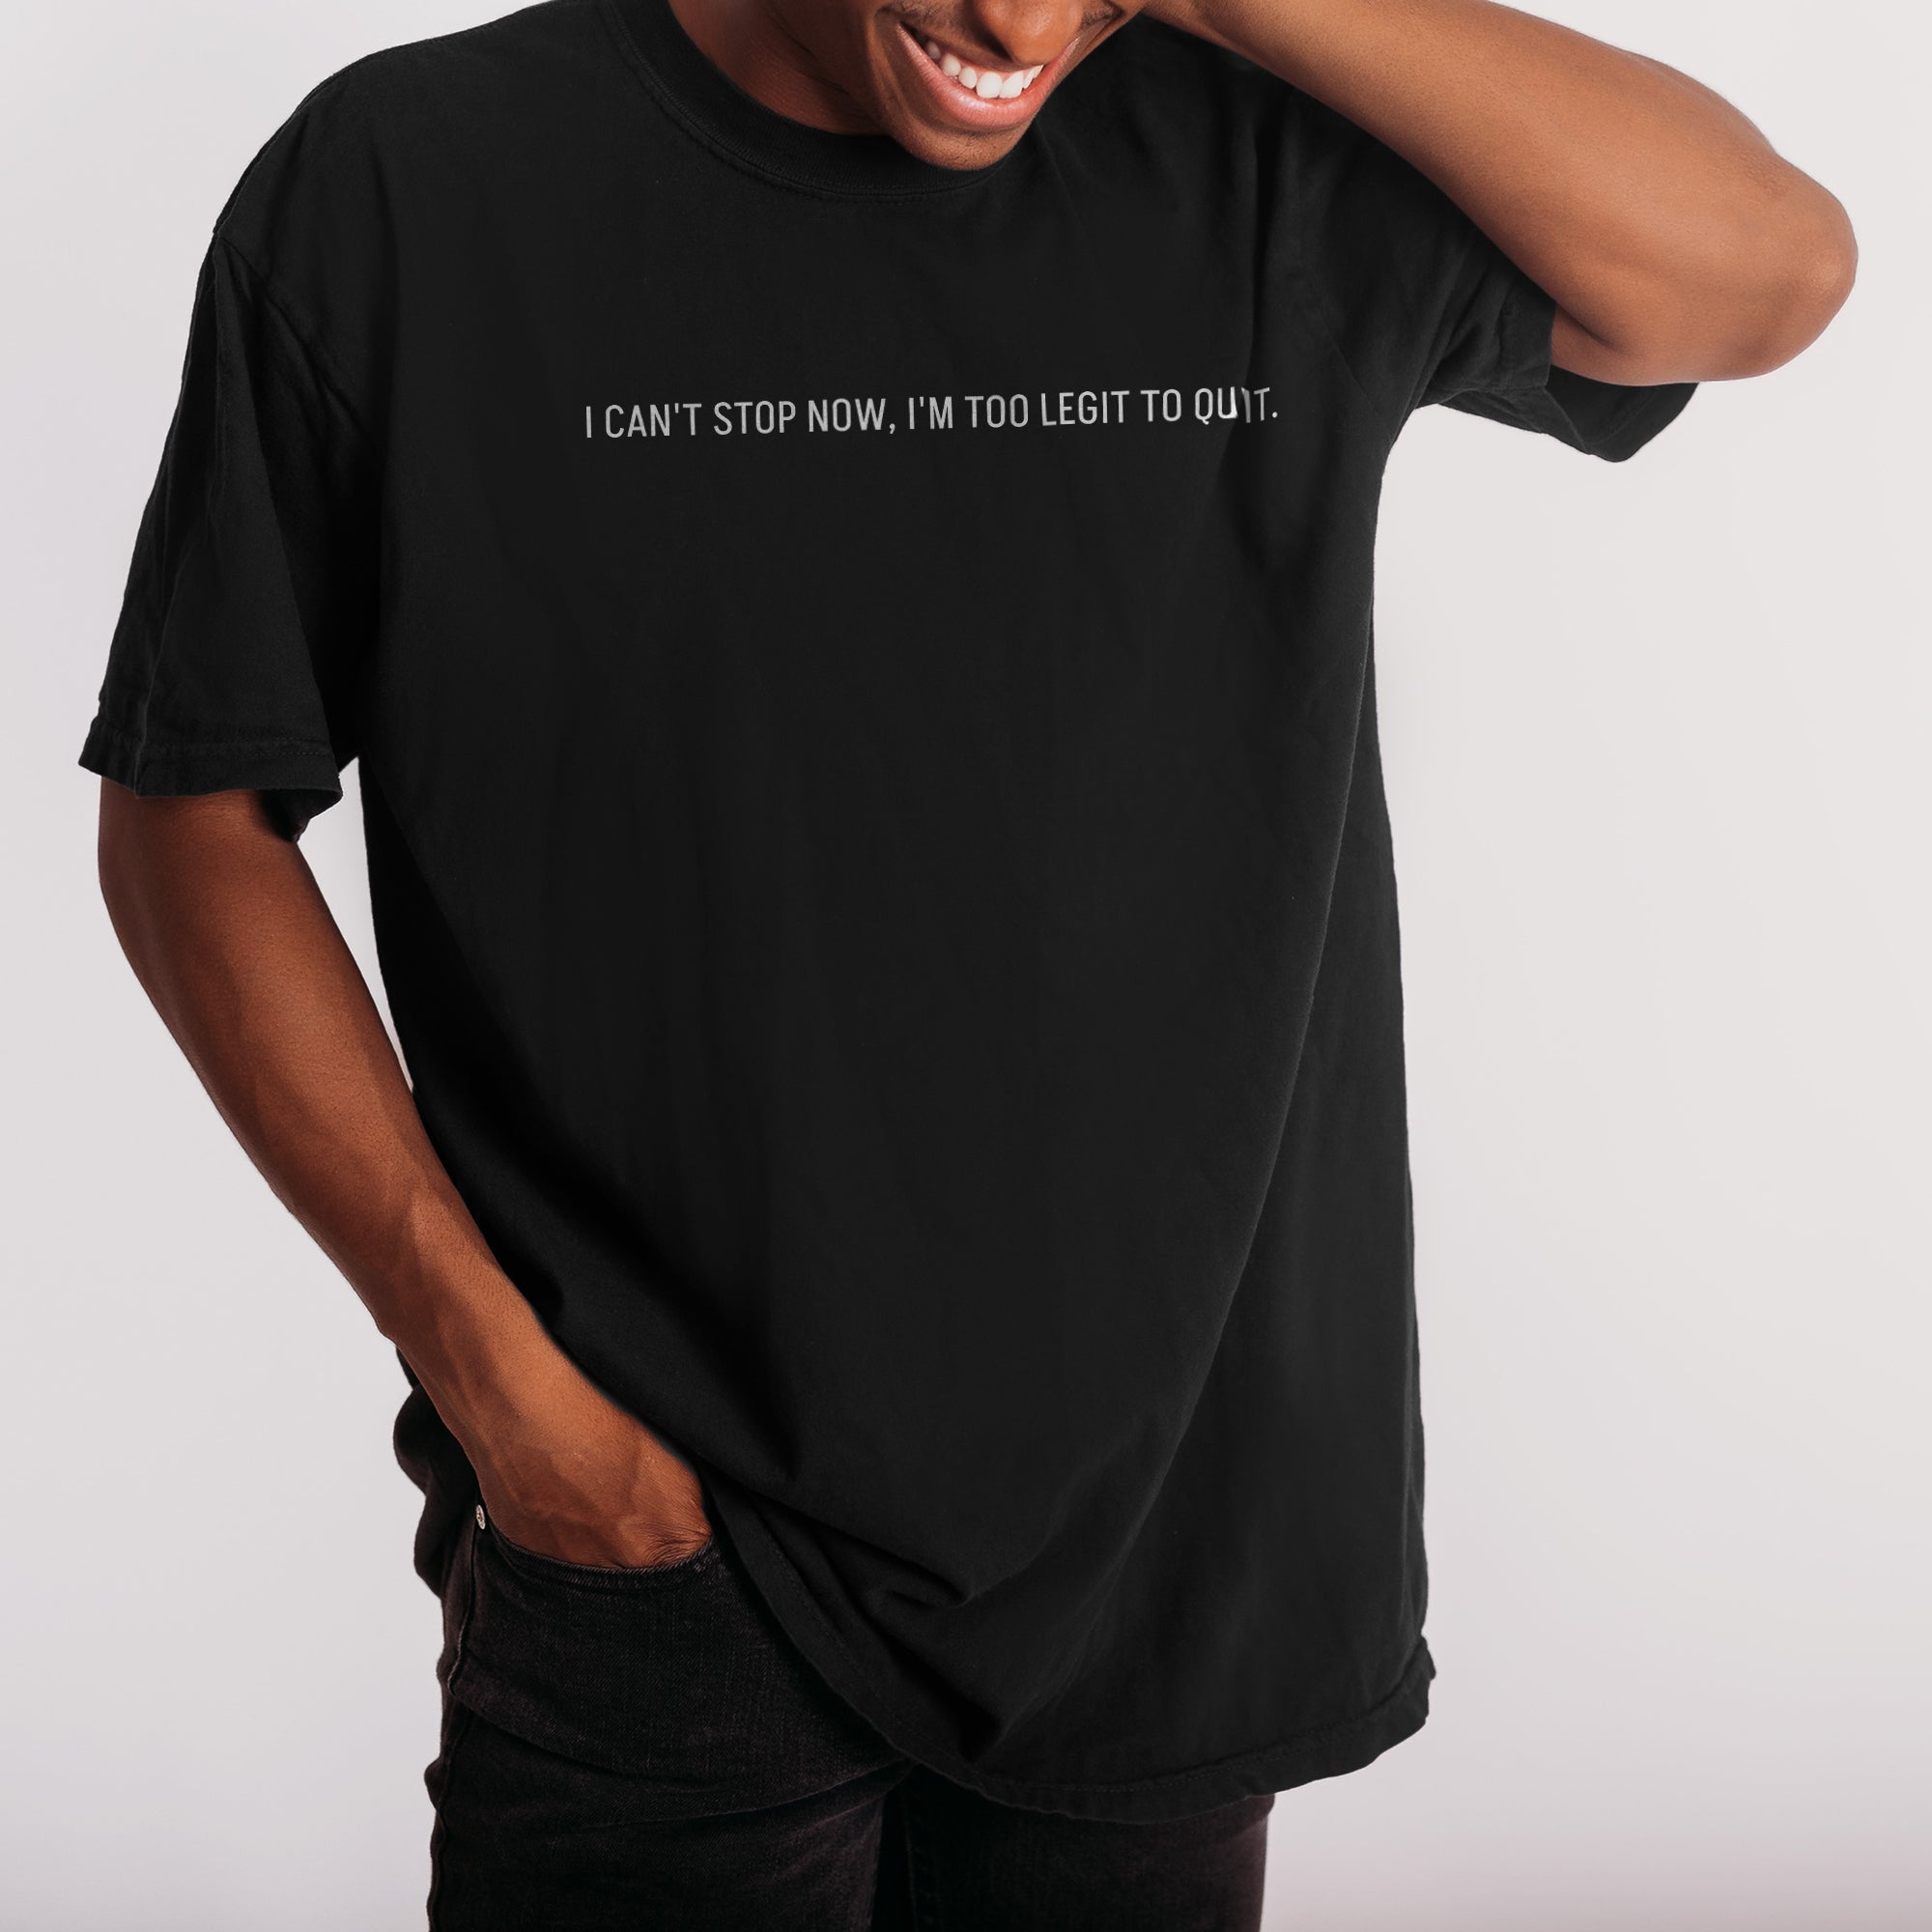 I Can't Stop Now, I'm Too Legit to Quit Boyfriend Crew Tee Solid Black Closeup Artwork and Texture